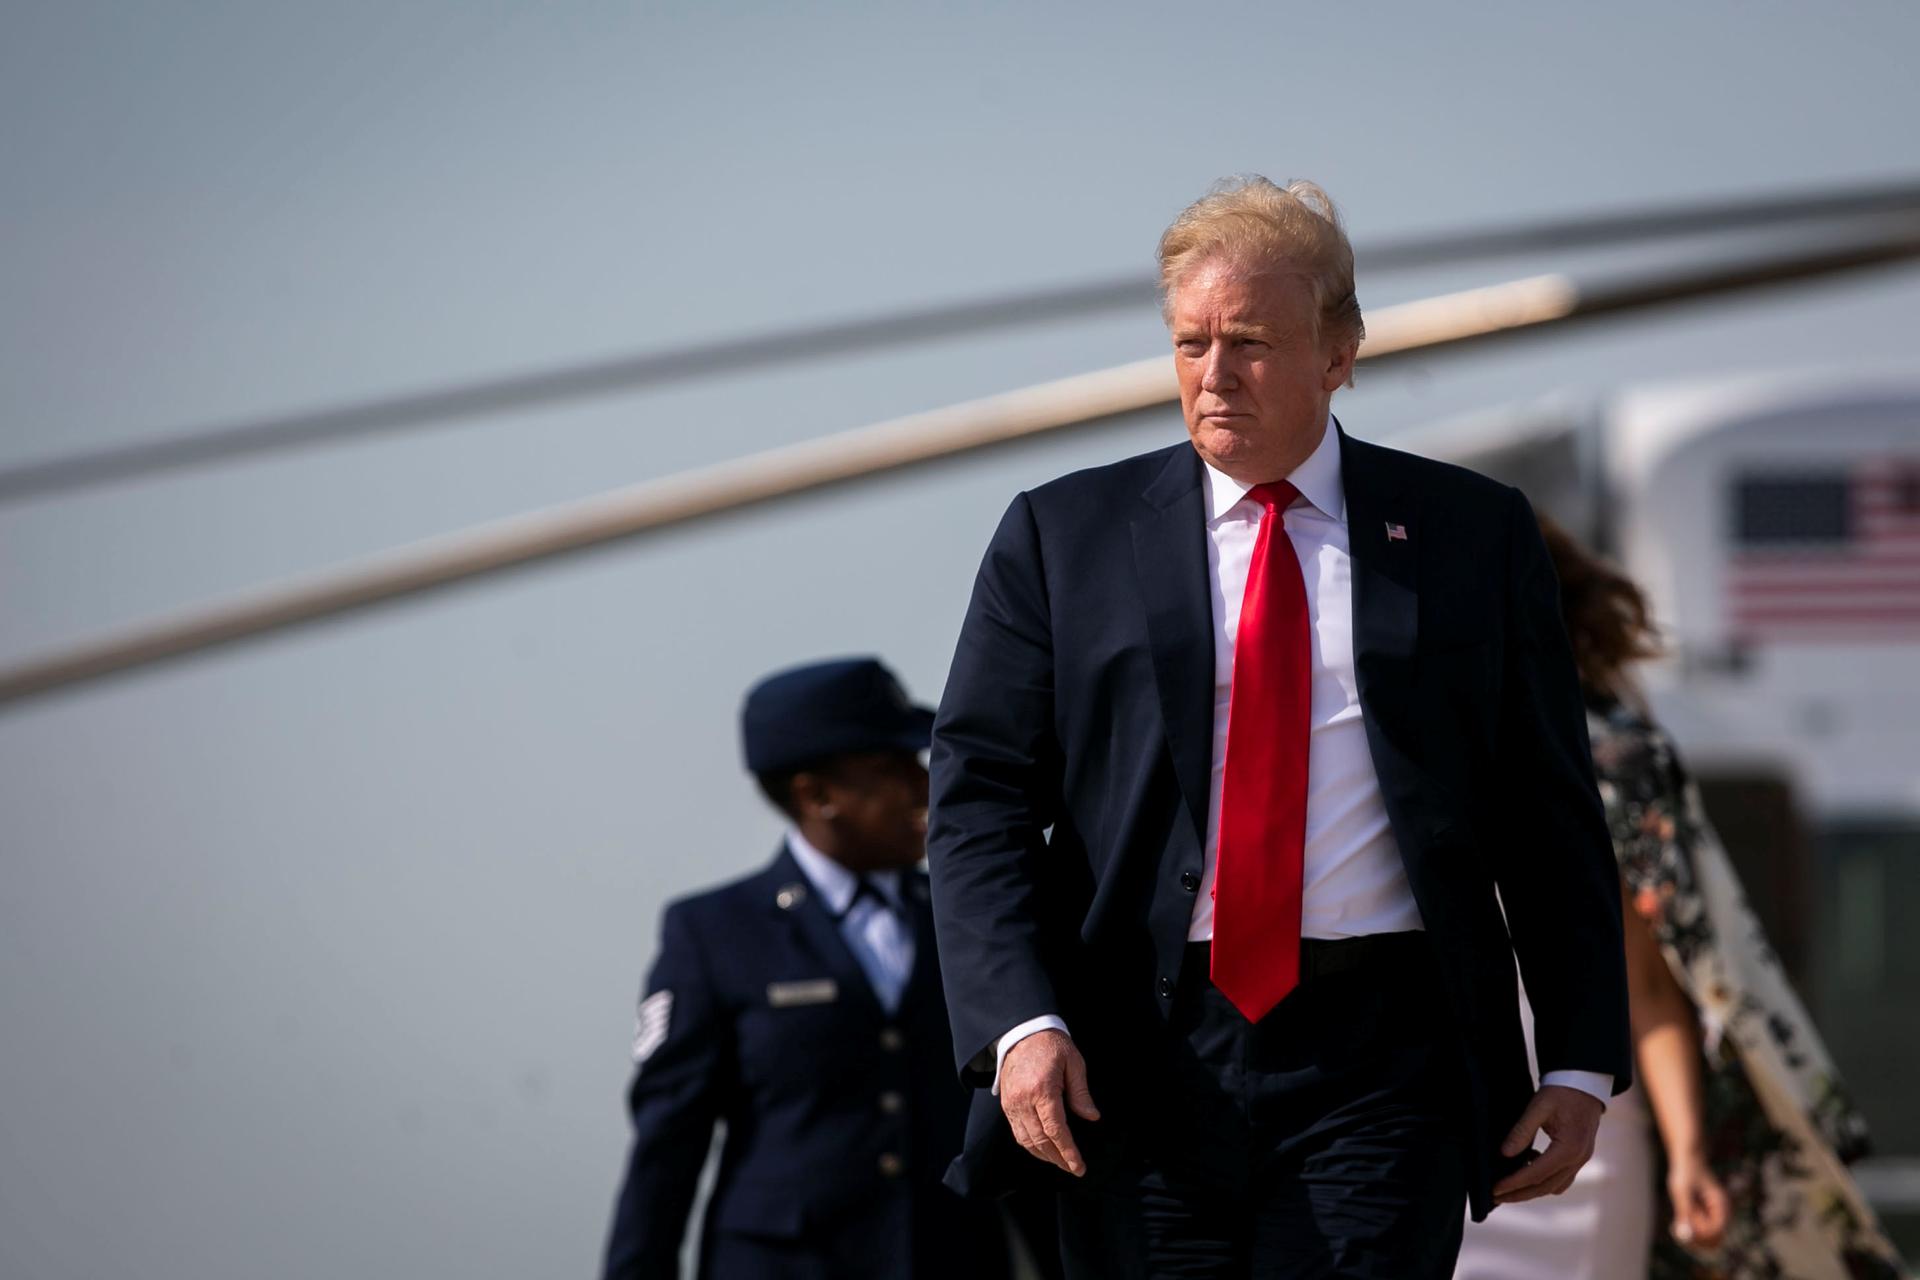 US President Donald Trump walks to board Air Force One as he travesl to Florida for Easter weekend, at Joint Base Andrews in Maryland, April 18, 2019.